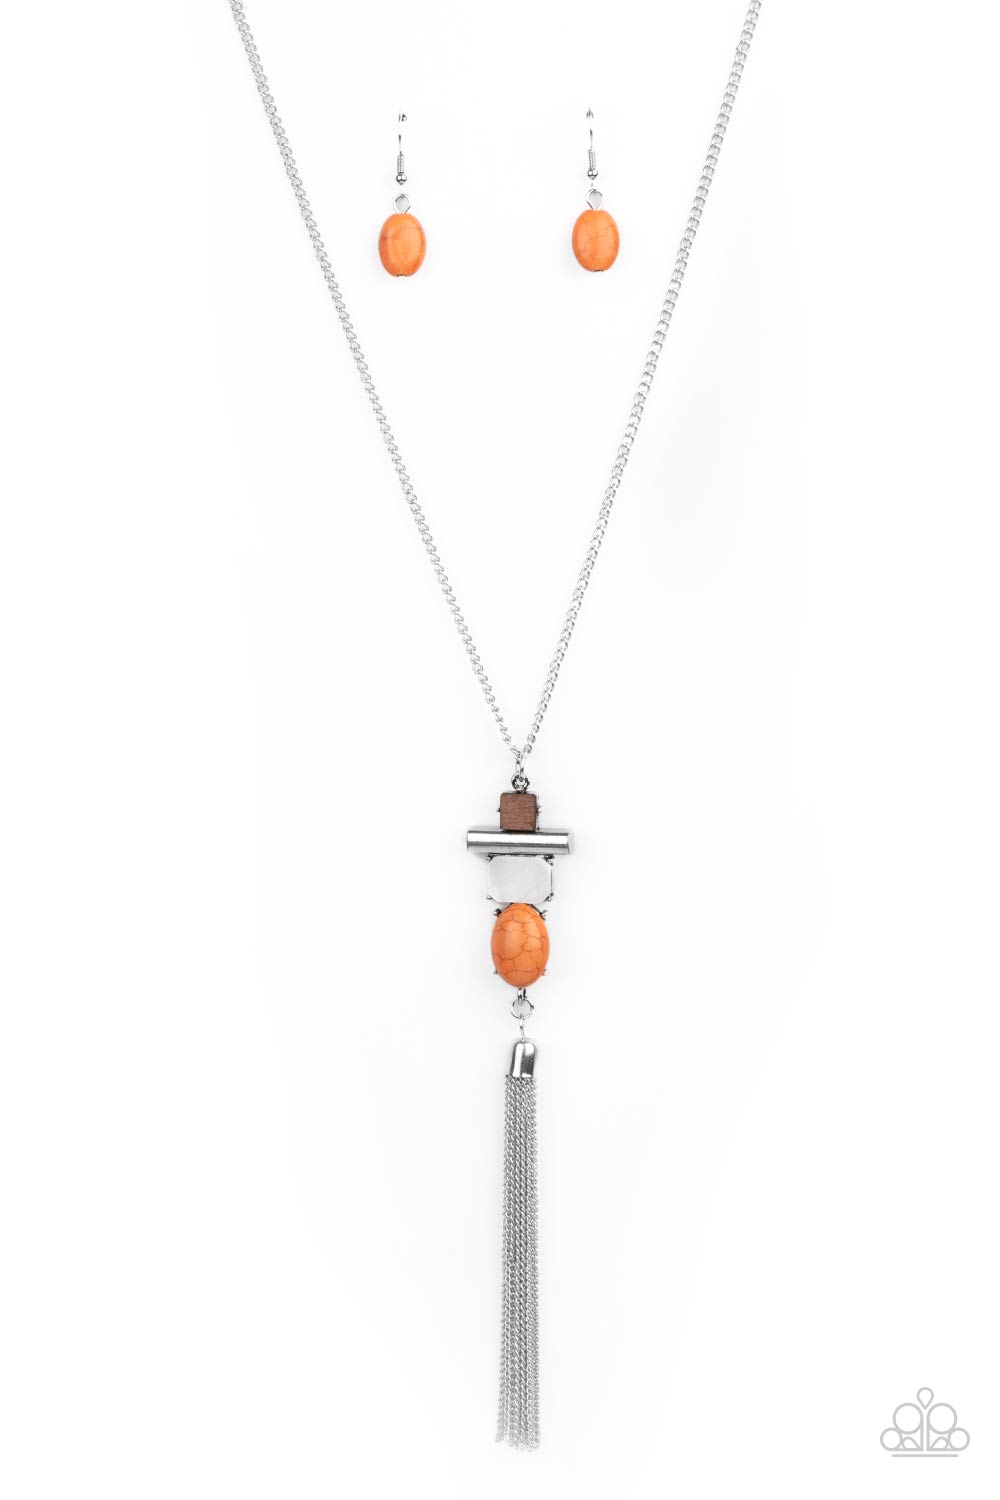 Natural Novice - Orange Stone - Wood - Silver Chain Necklace Necklaces Bejeweled Accessories By Kristie Featuring Paparazzi Jewelry - Trendy fashion jewelry for everyone -